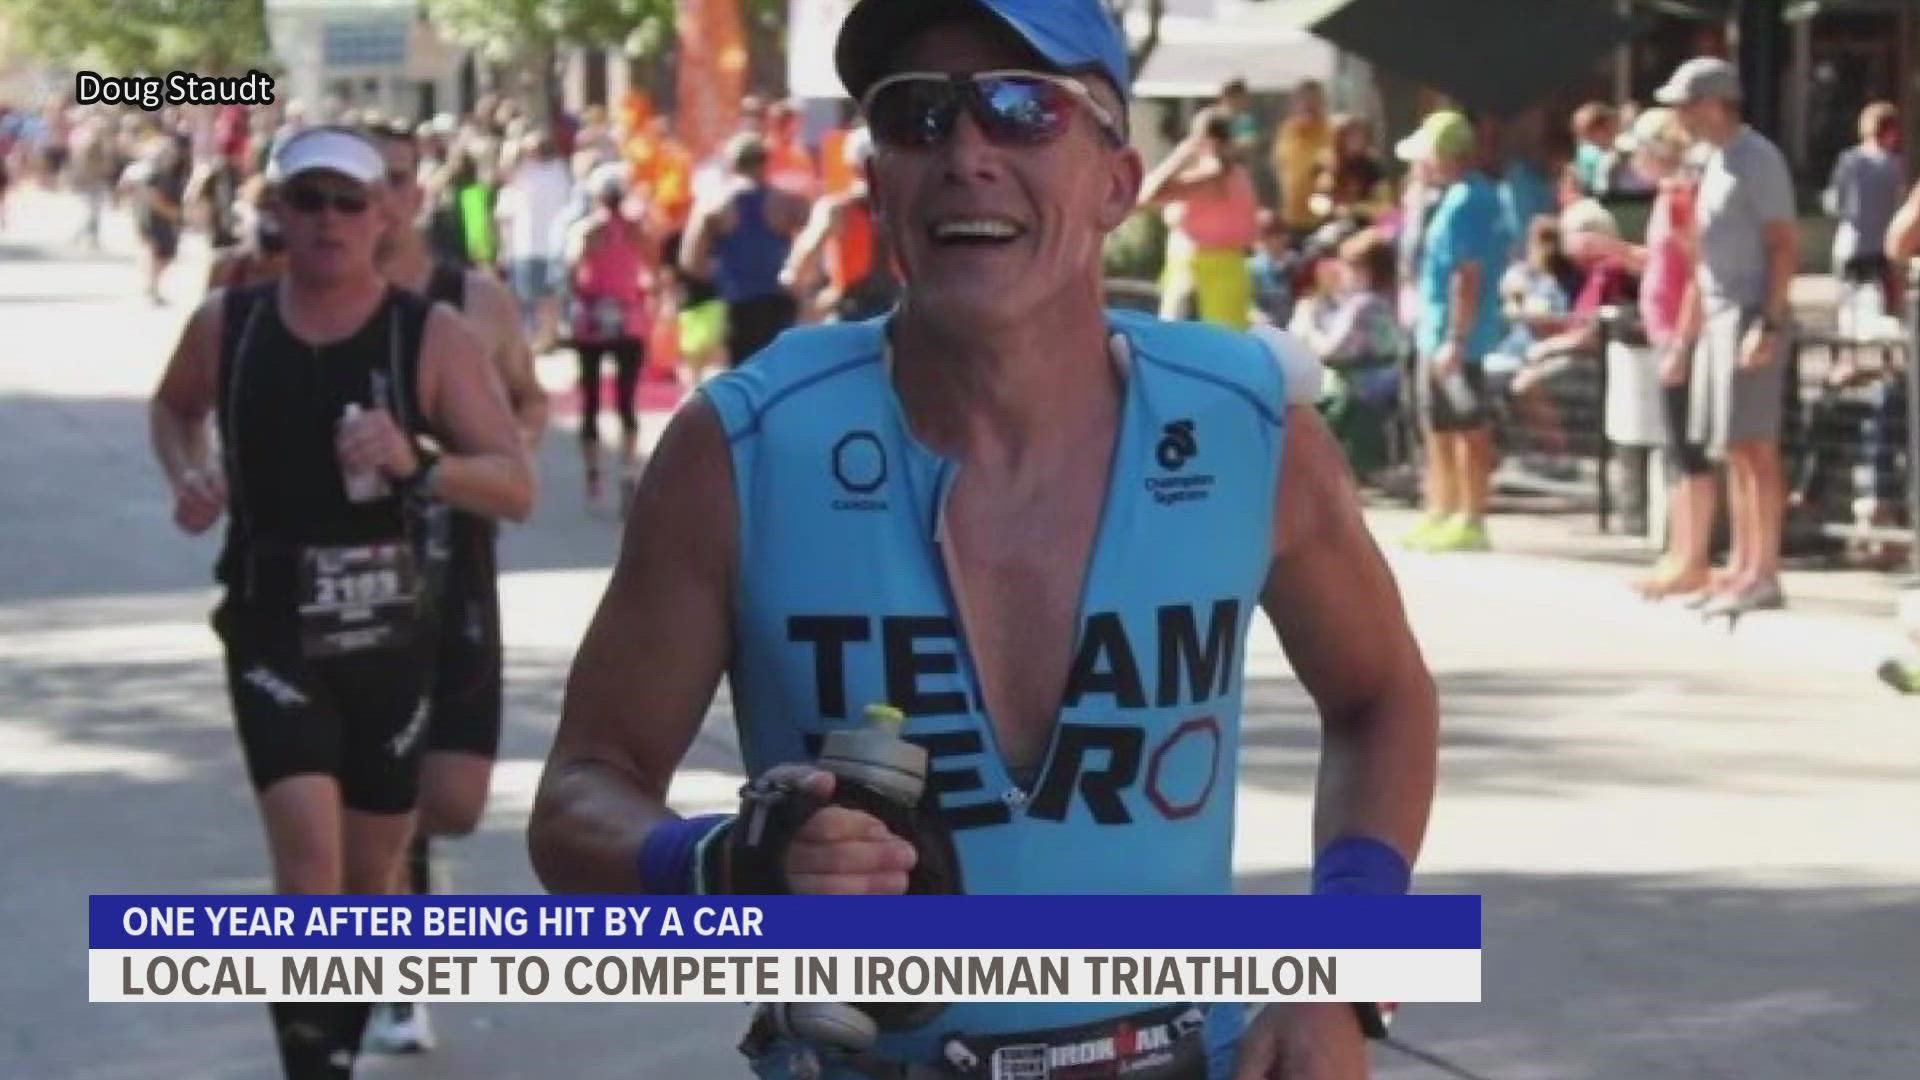 A bike accident prevented Doug Staudt from competing in 2021. Now, with a renewed sense of purpose, the three -time iron man competitor 
is getting back on track.